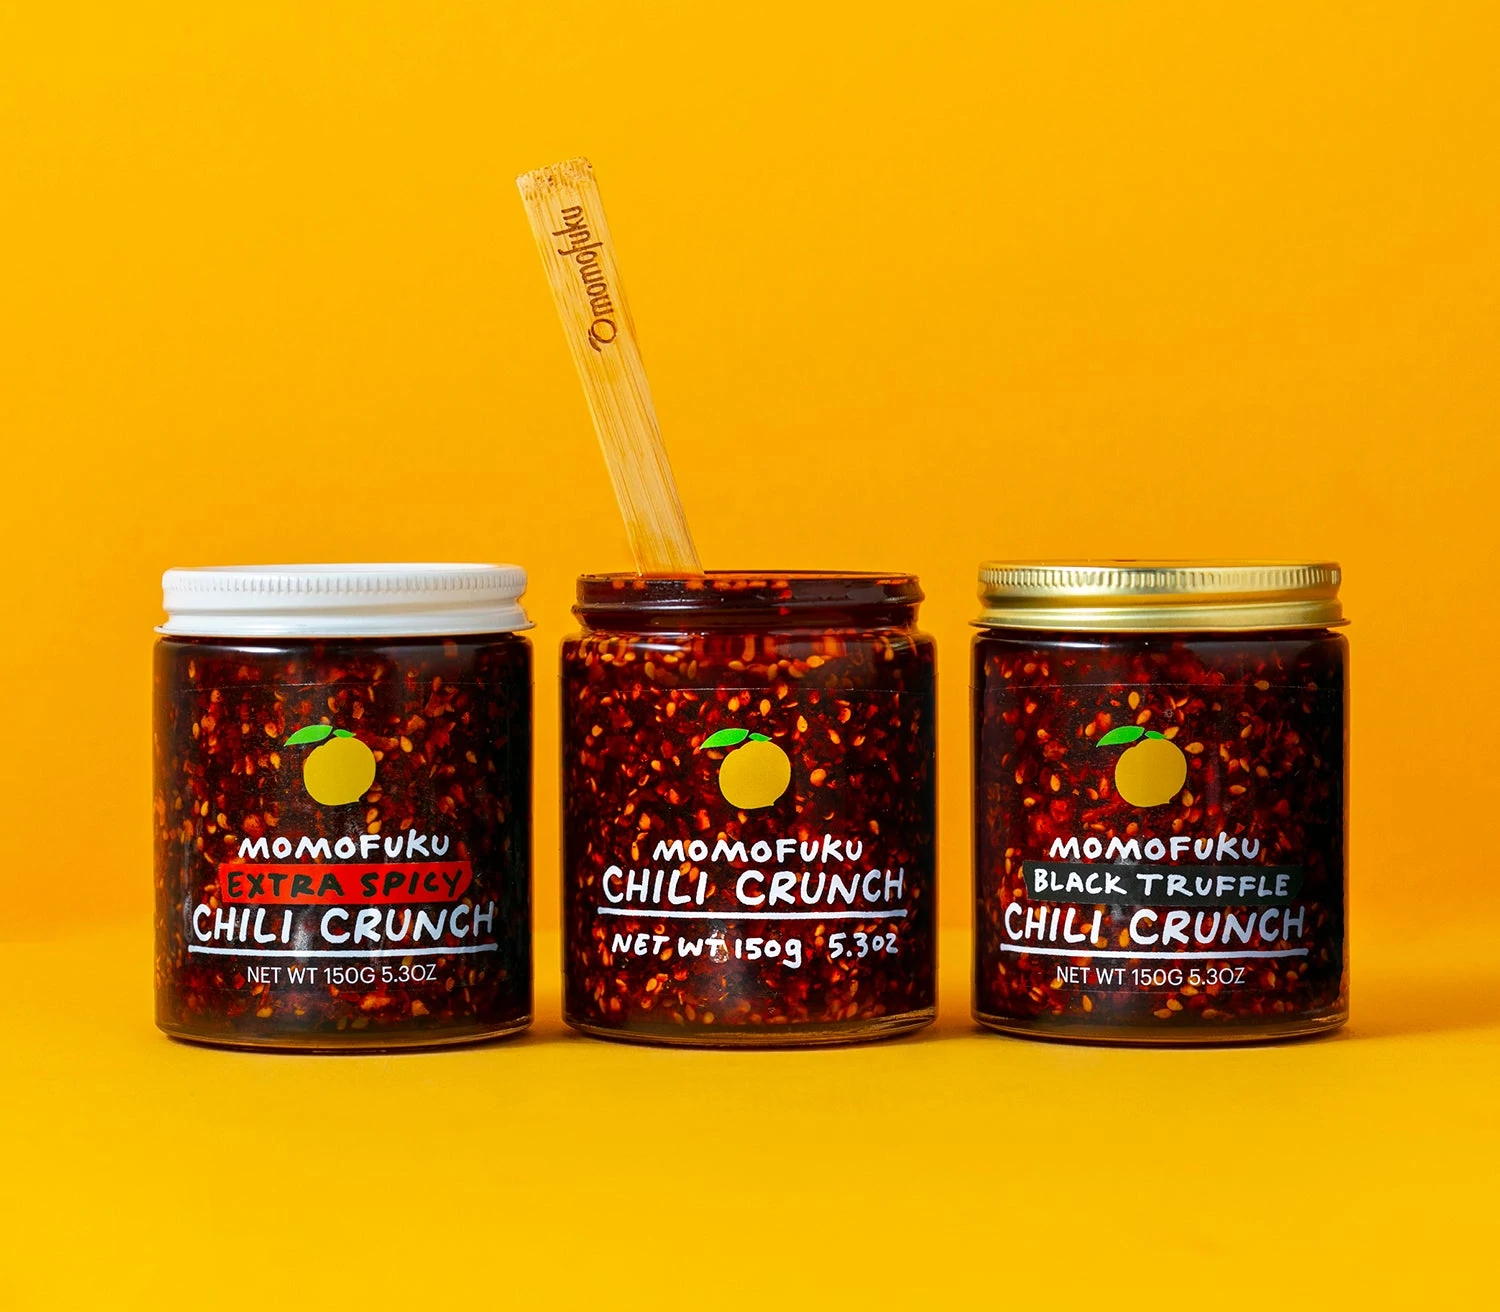 the three jars of chili oil against a yellow background